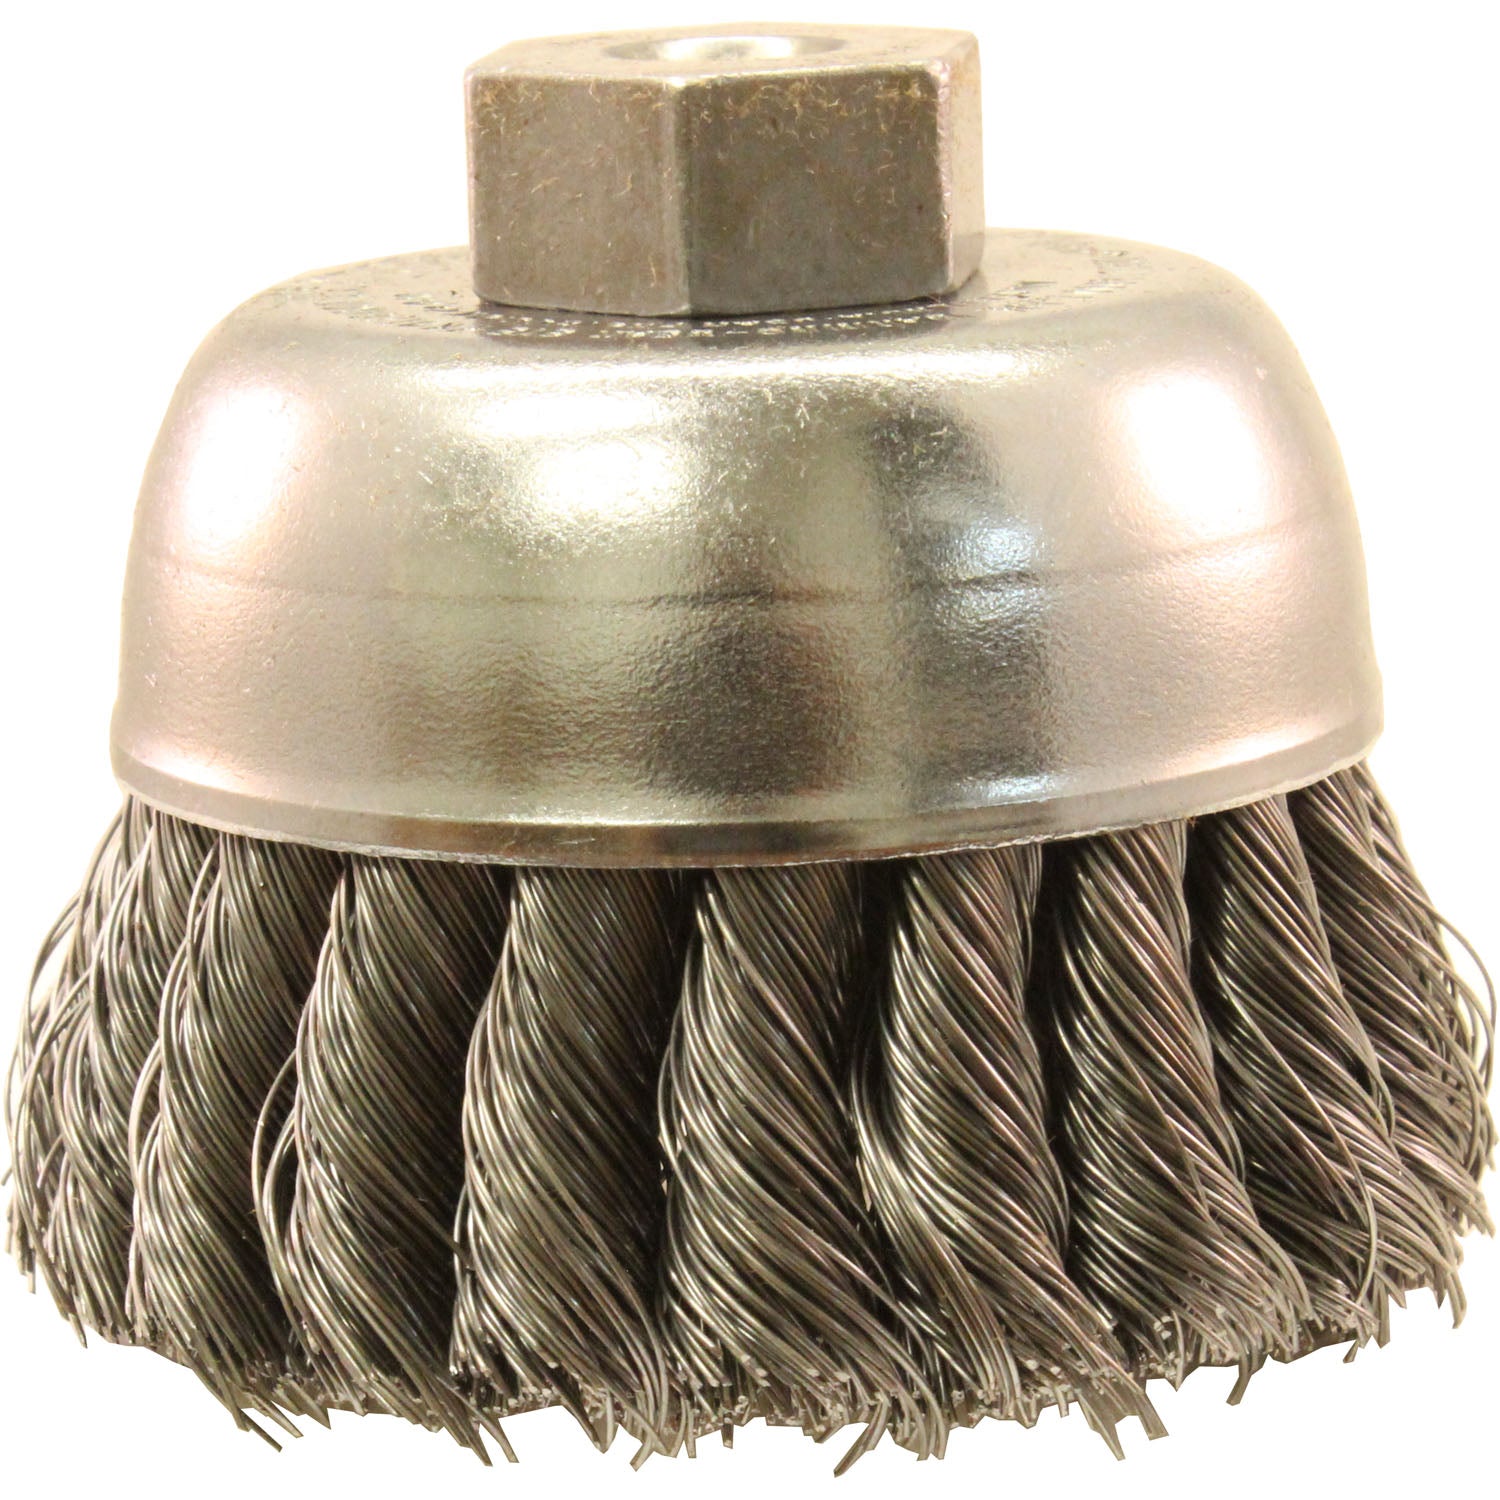 Weiler 13021 2-3/4" Knot Wire Cup Brush .014 Steel Fill, 3/8"-24 Nut